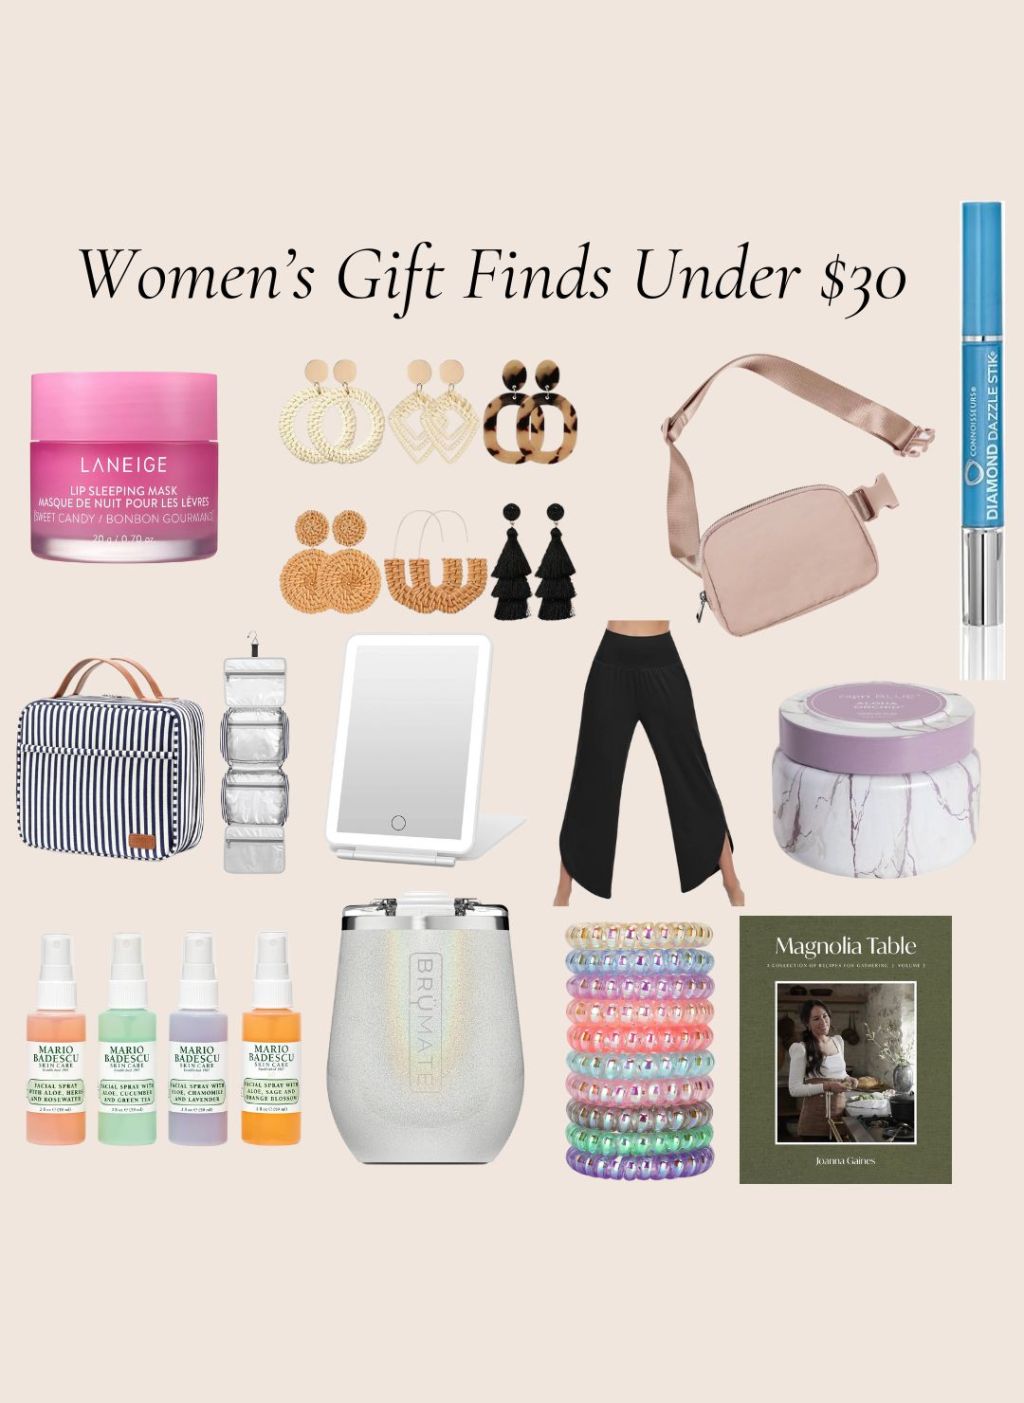 Gifts Ideas for Girl Friends Under $30